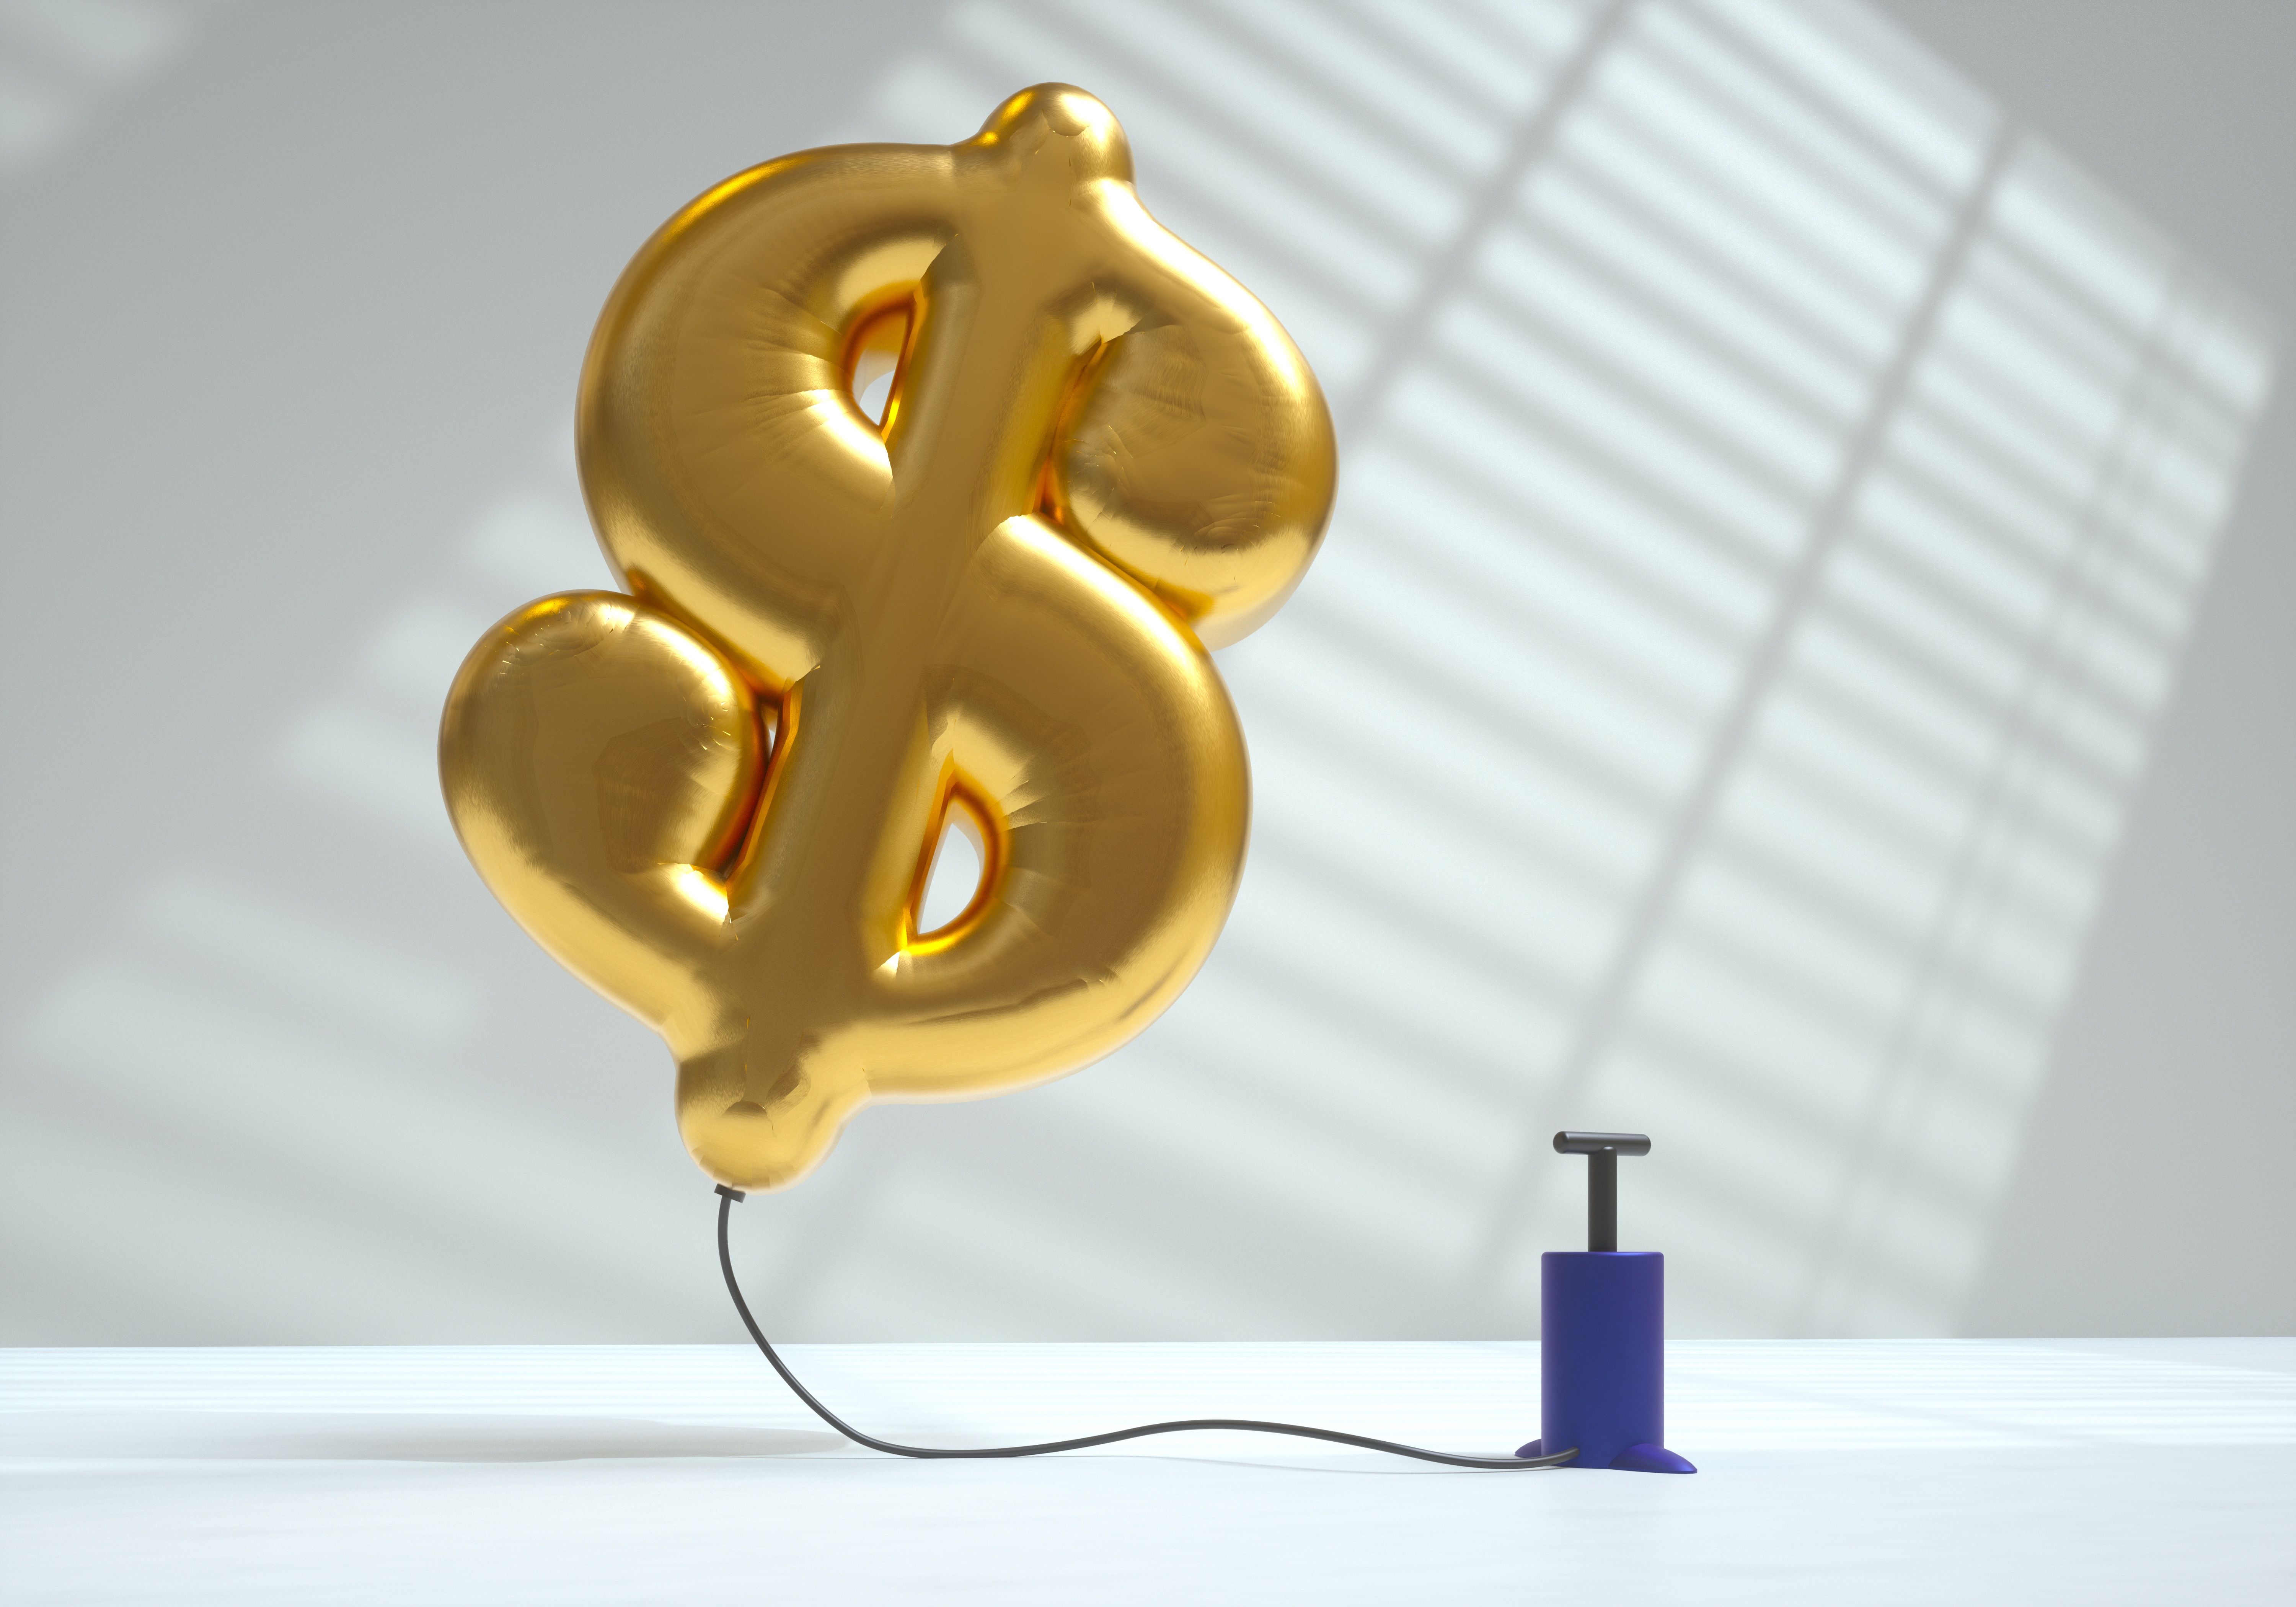 Digital created image of a gold air balloon in the shape of a dollar sign inflated using a pump and flying against a white background.